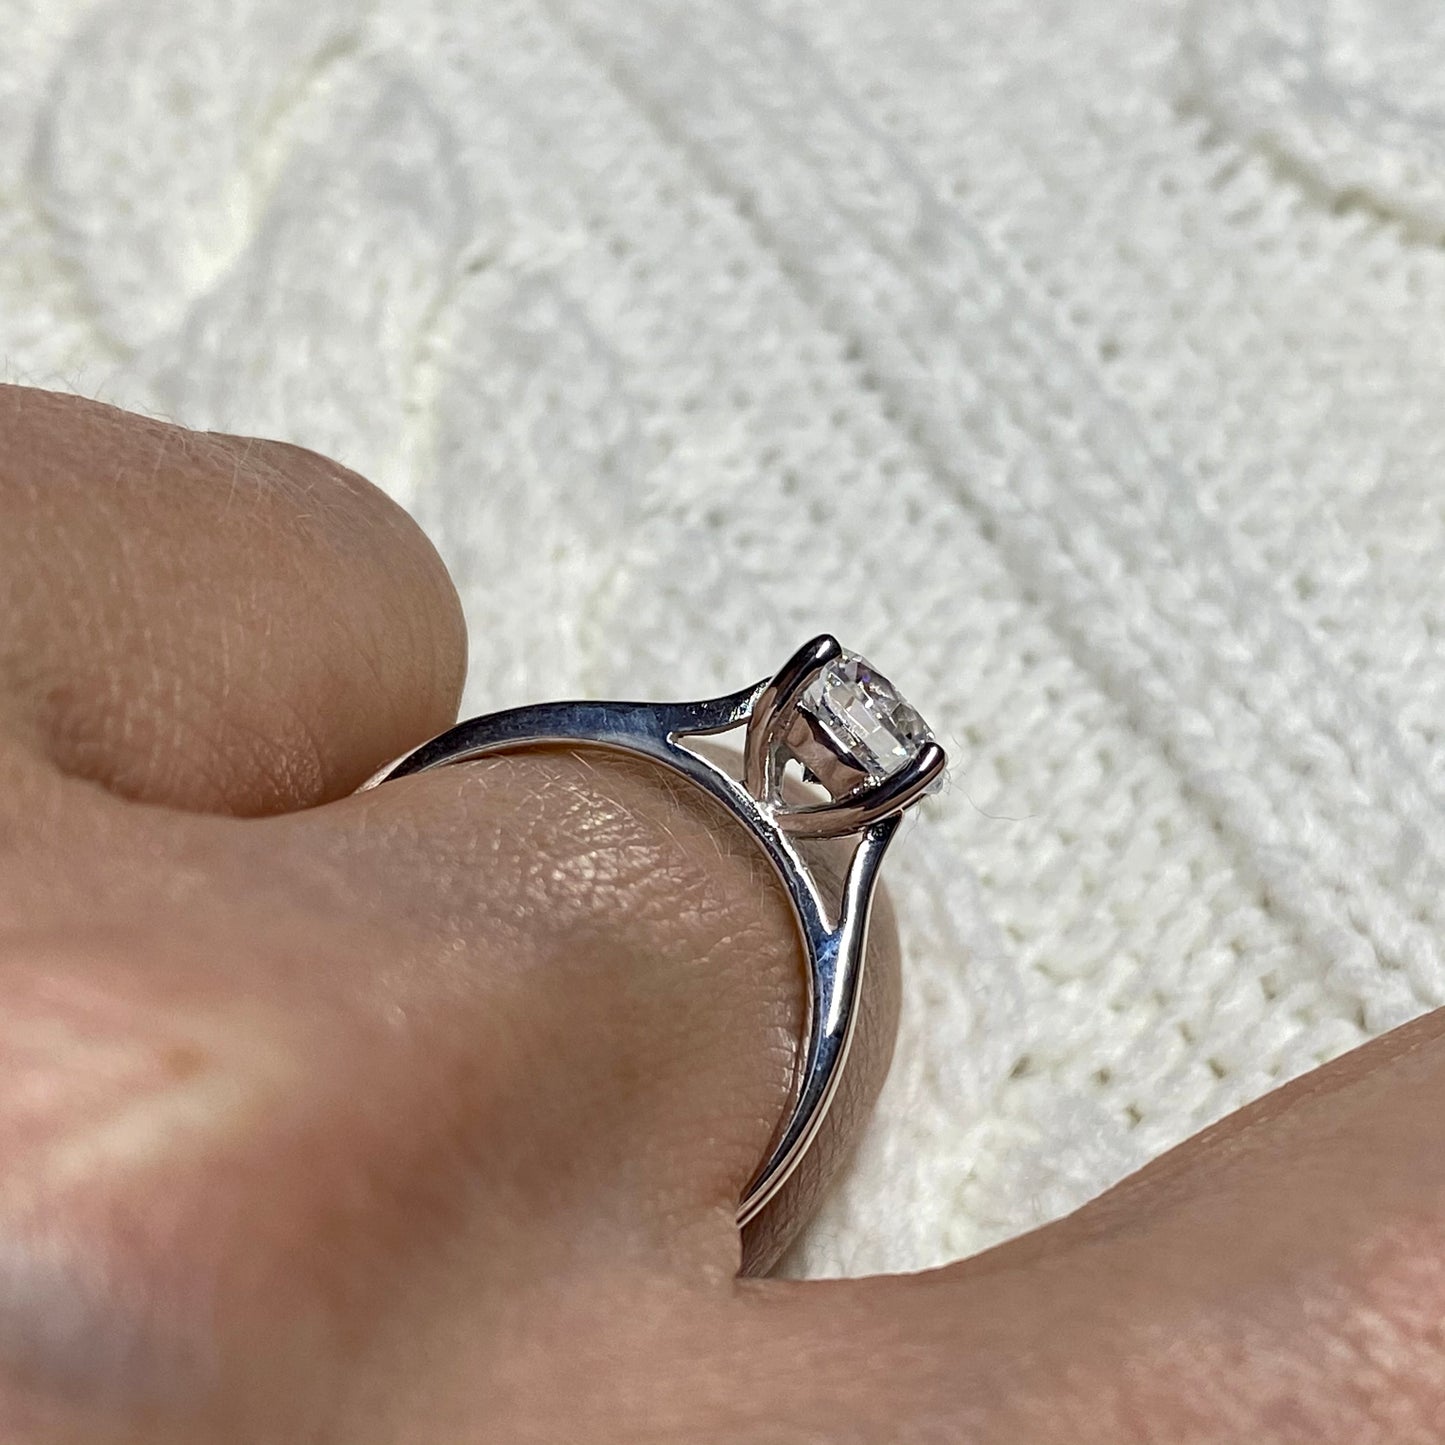 9ct White Gold 7mm CZ Four Claw Solitaire Ring - John Ross Jewellers